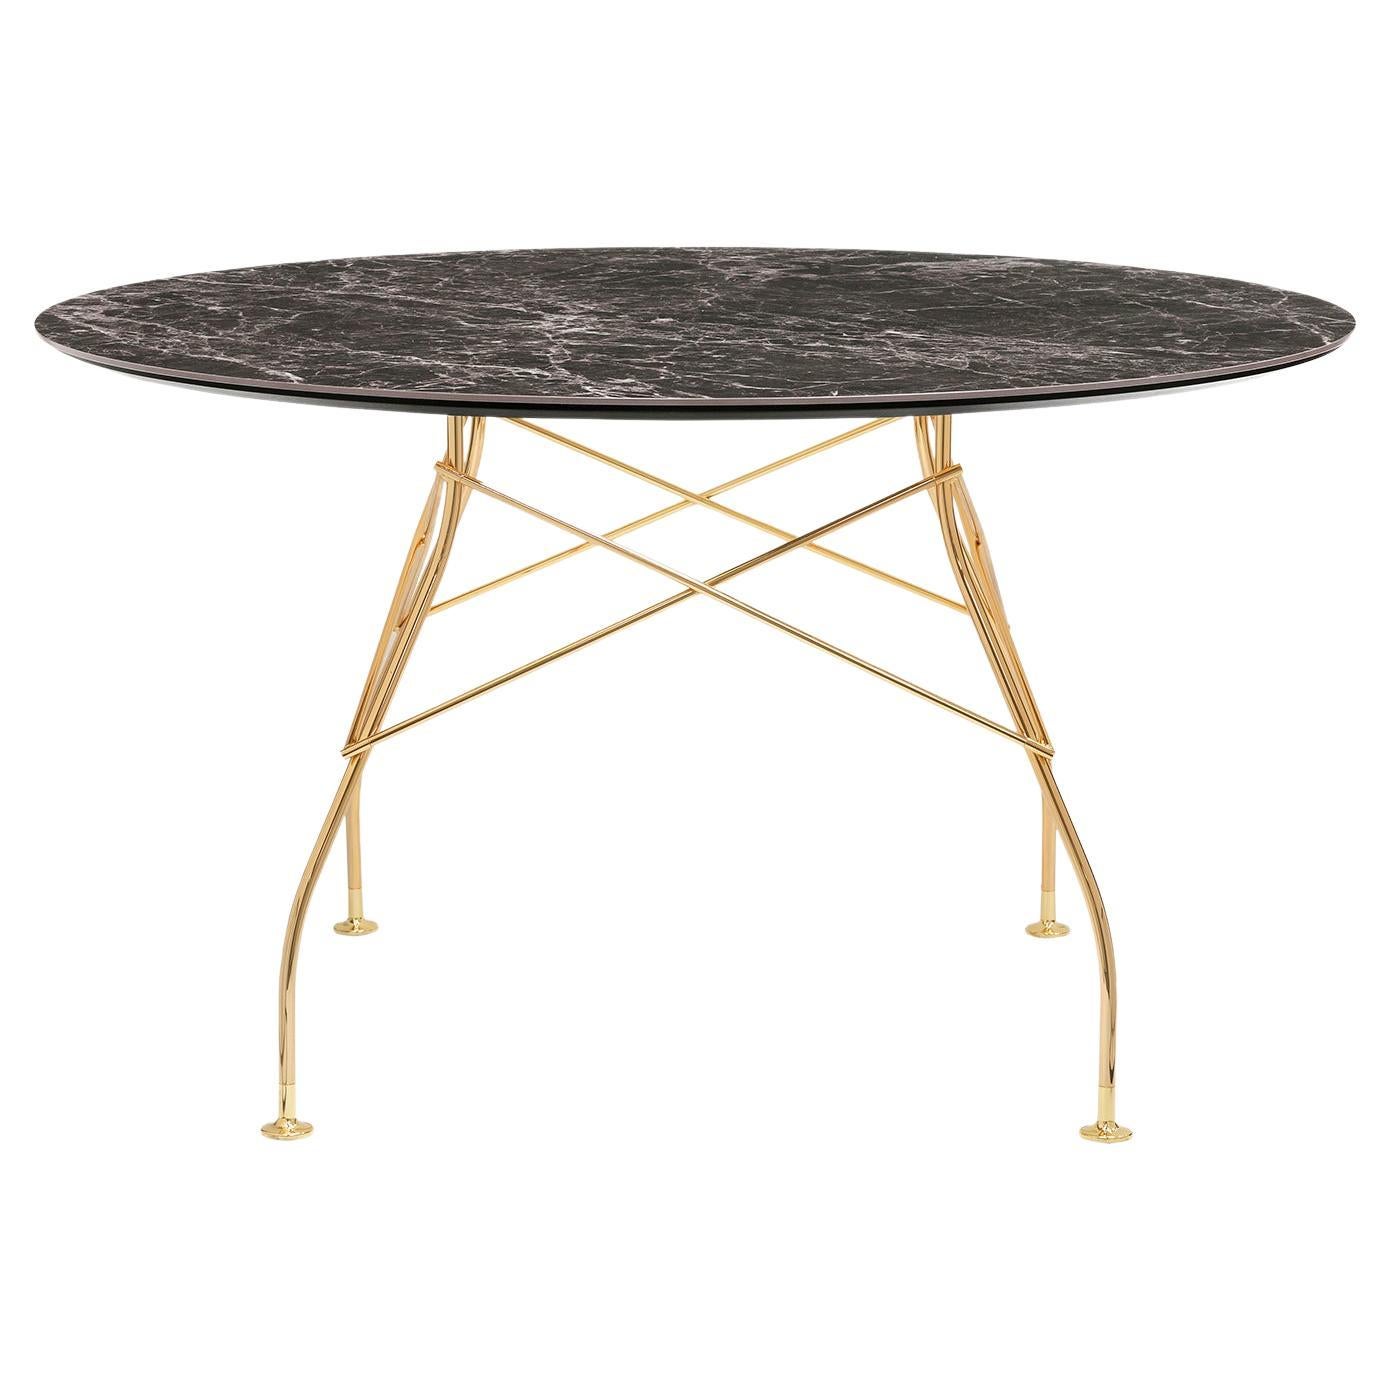 Kartell Round Glossy Table in Brown Emperador Marble by Antonio Citterio